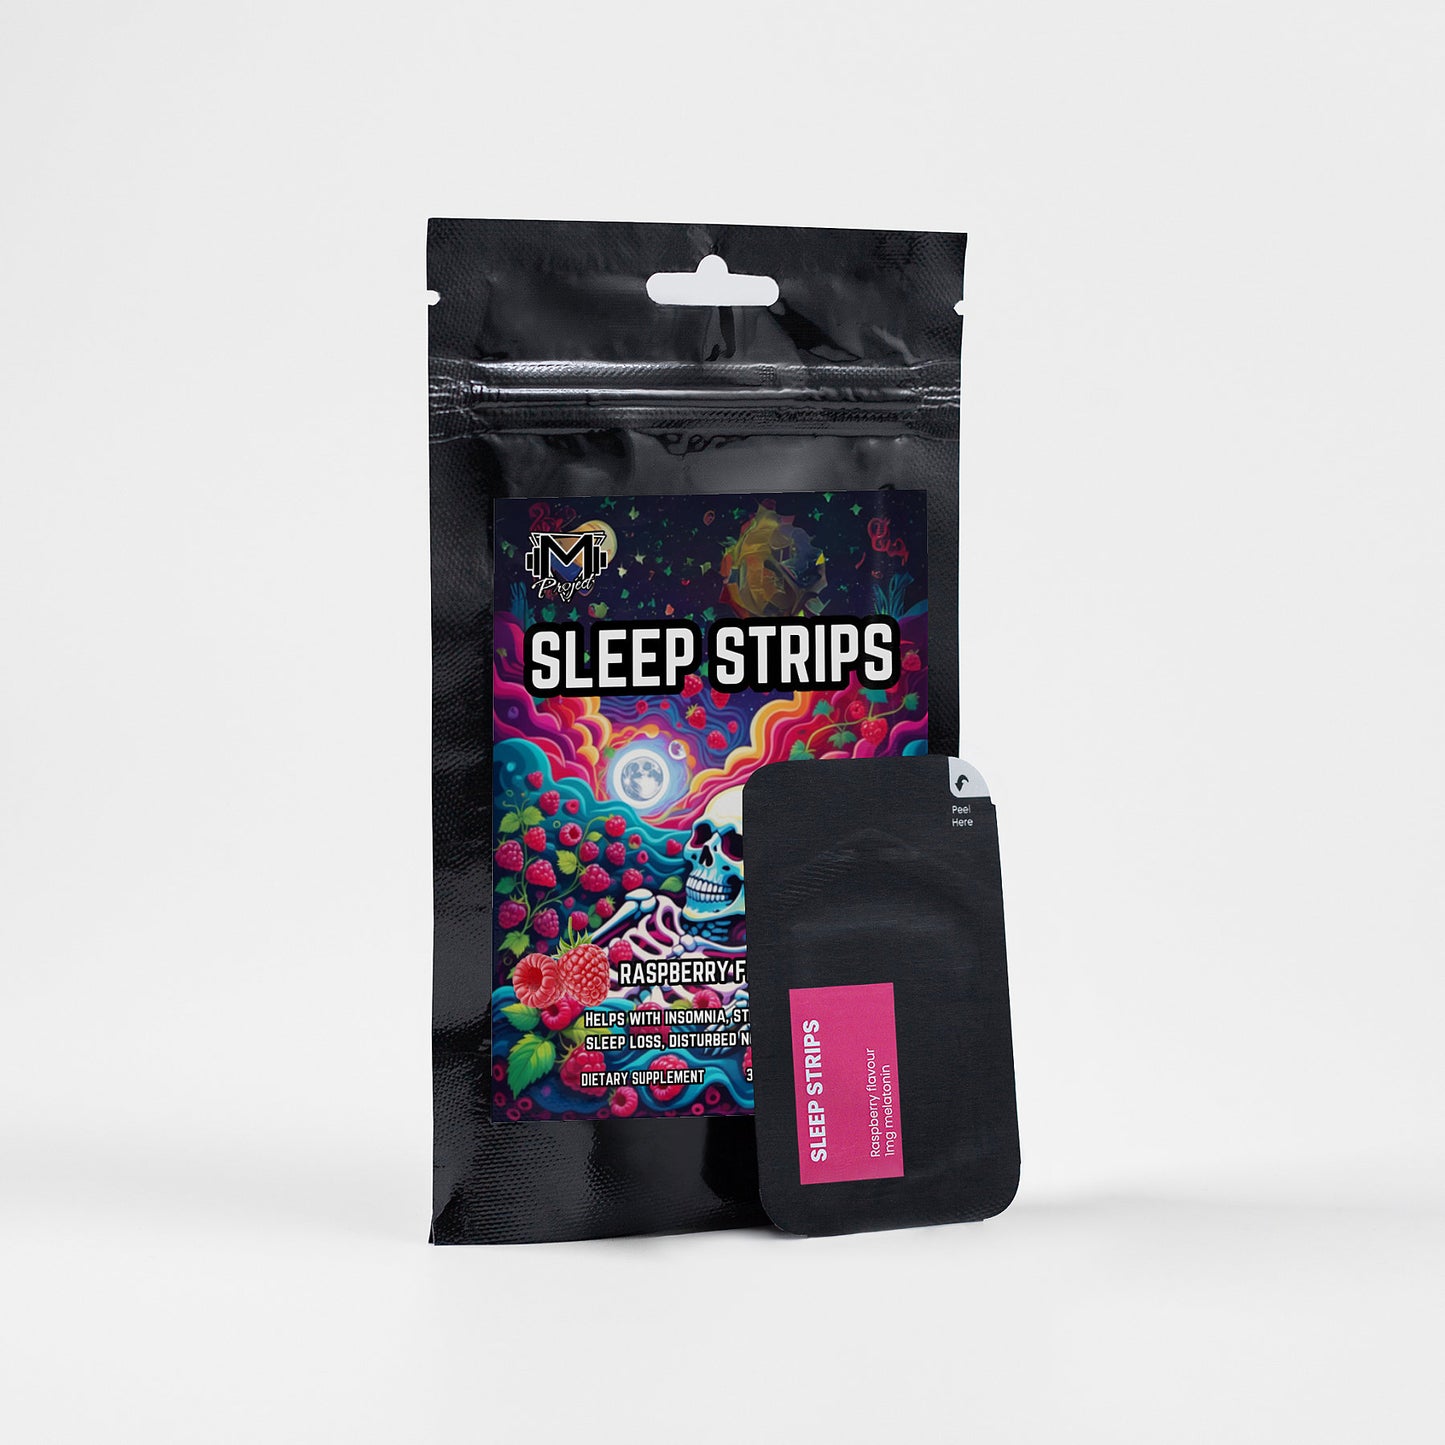 Sleep Strips by Project M